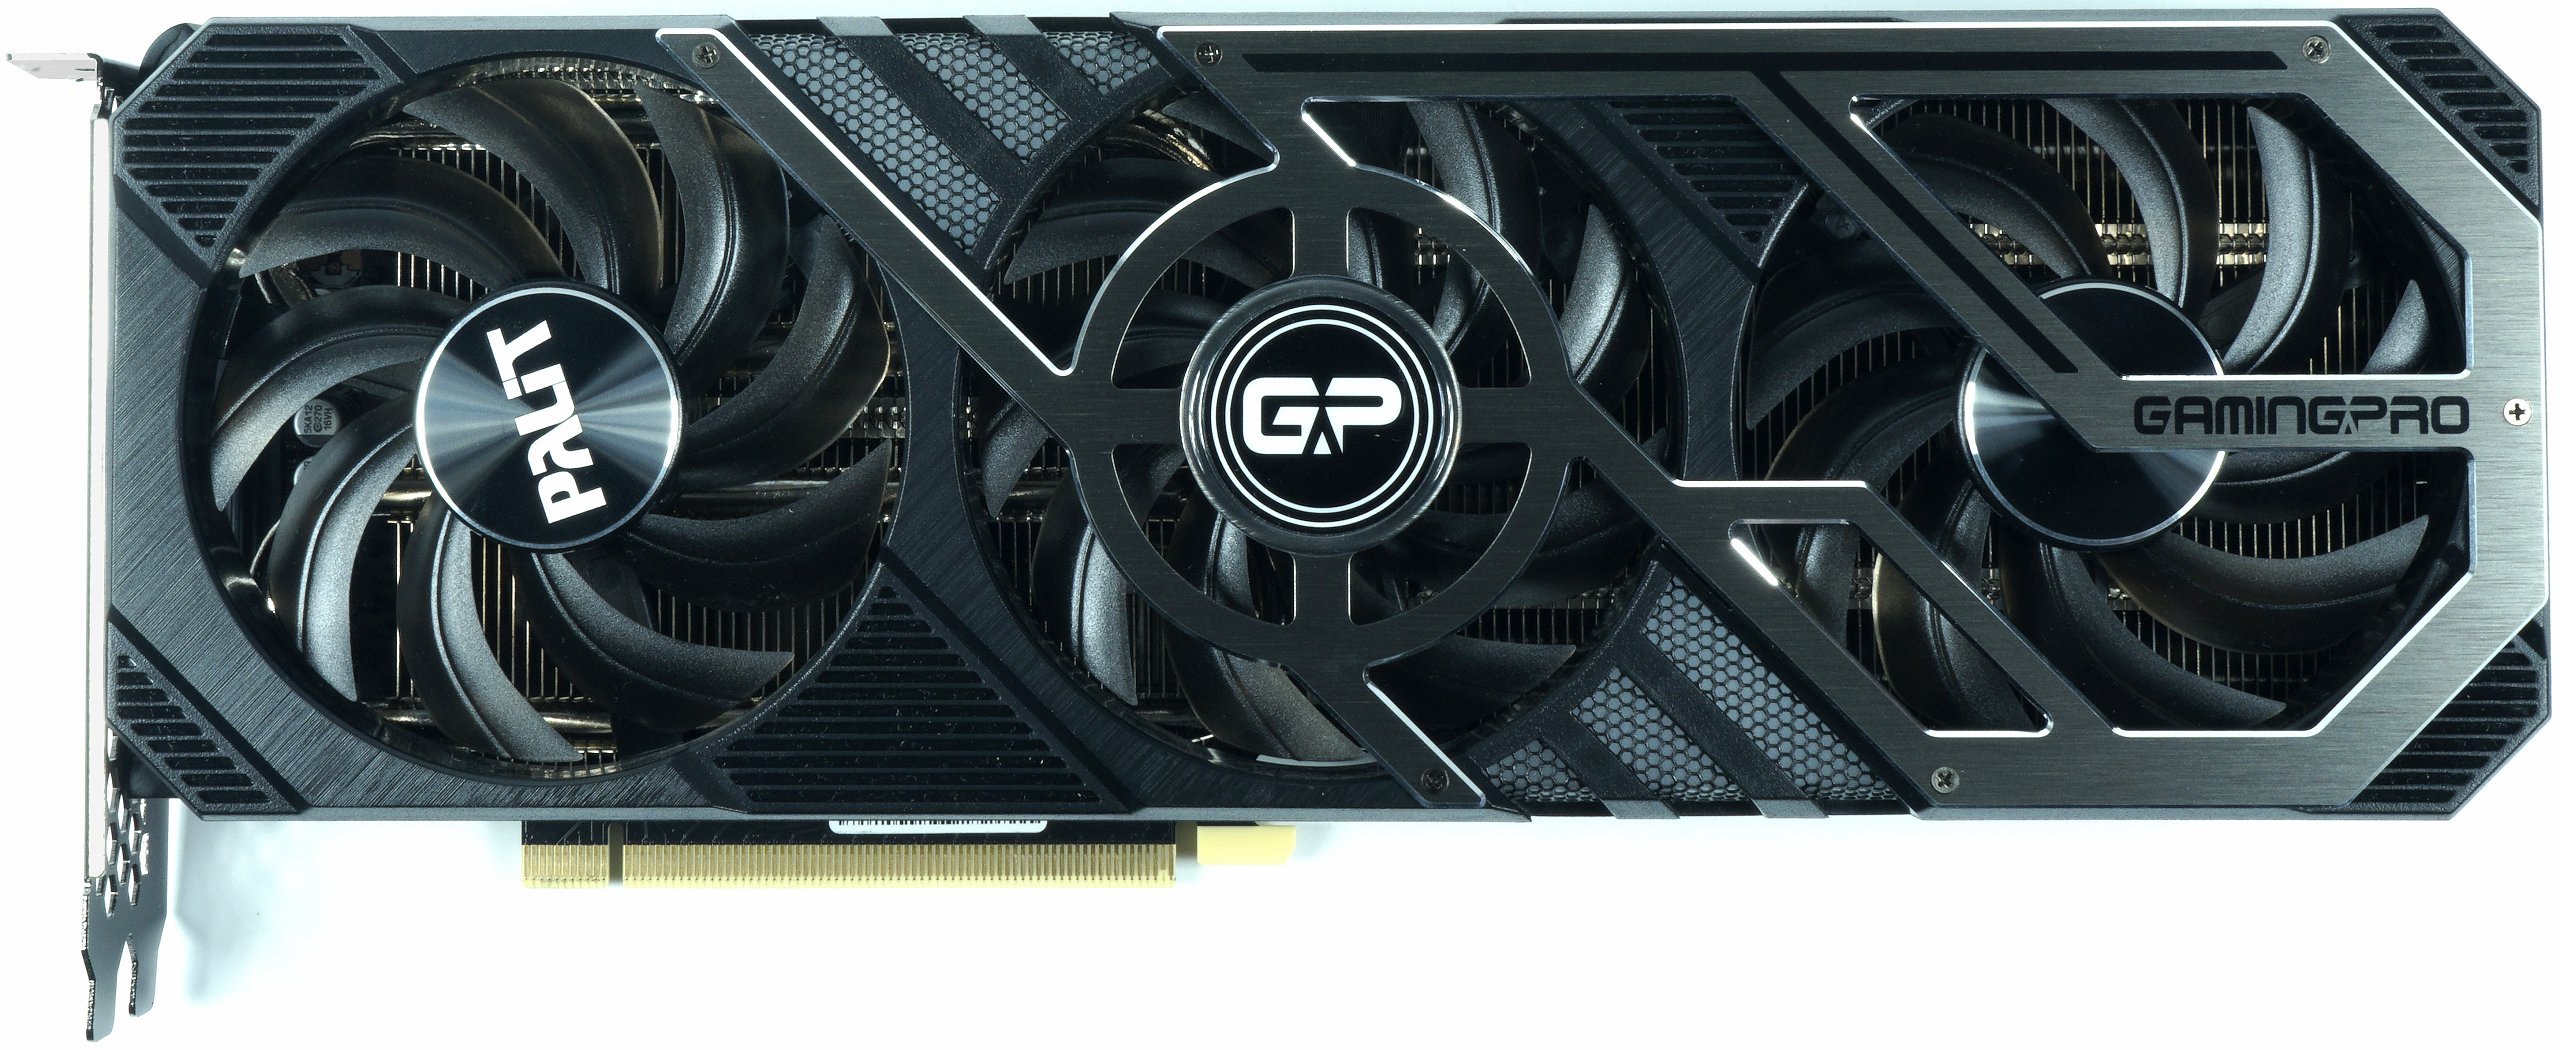 Palit GeForce RTX 3080 Gaming Pro Review - Reasonable Entry into